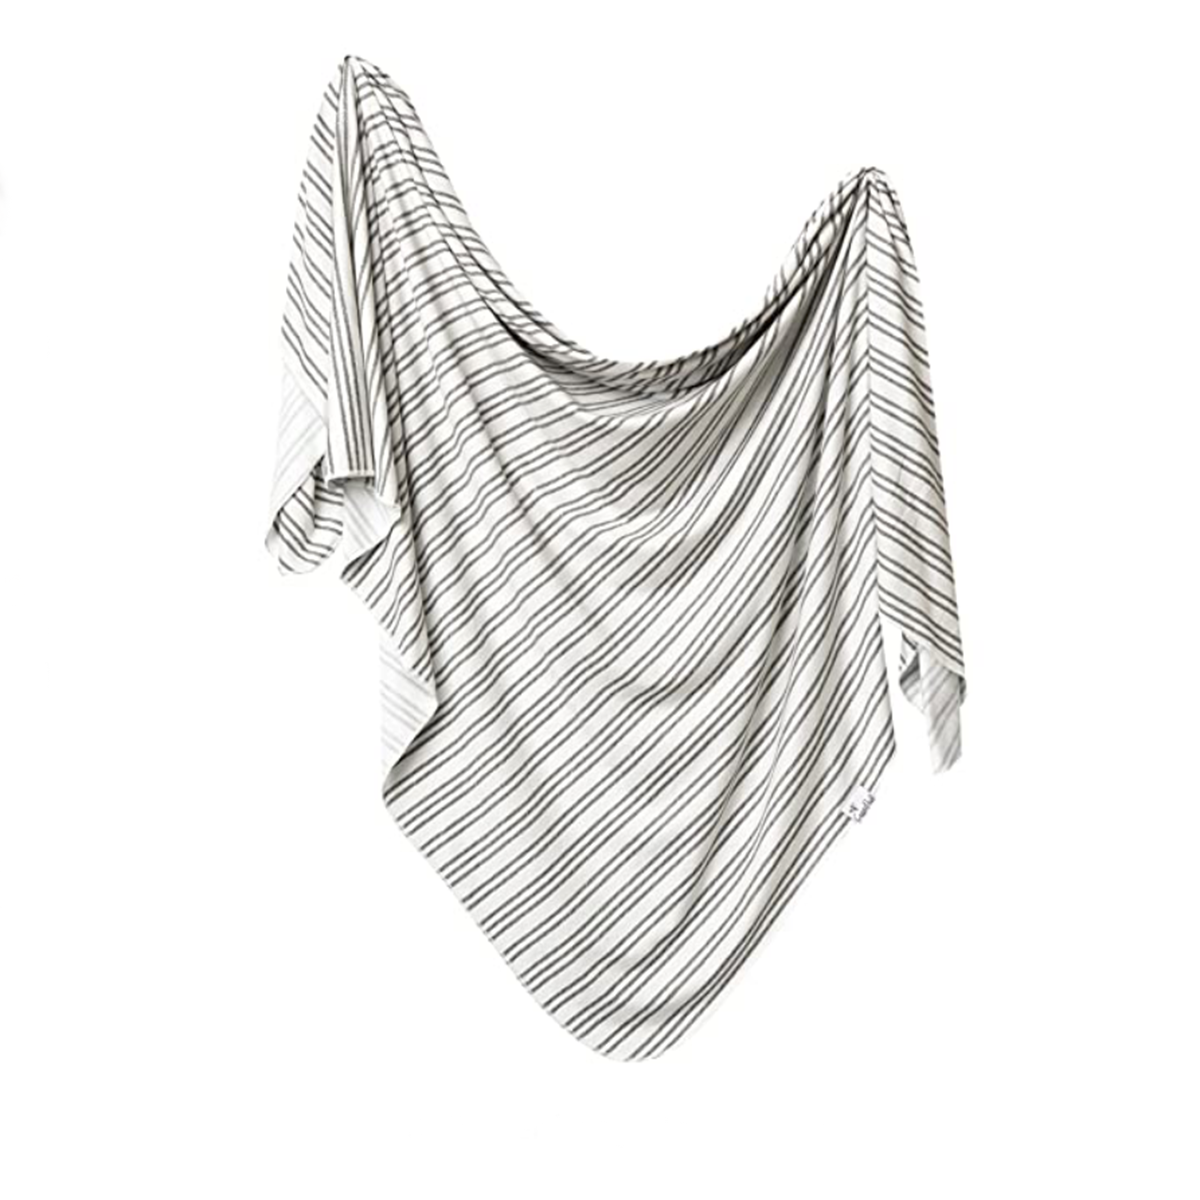 copper pearl midtown stripes baby swaddle newborn photographer.png